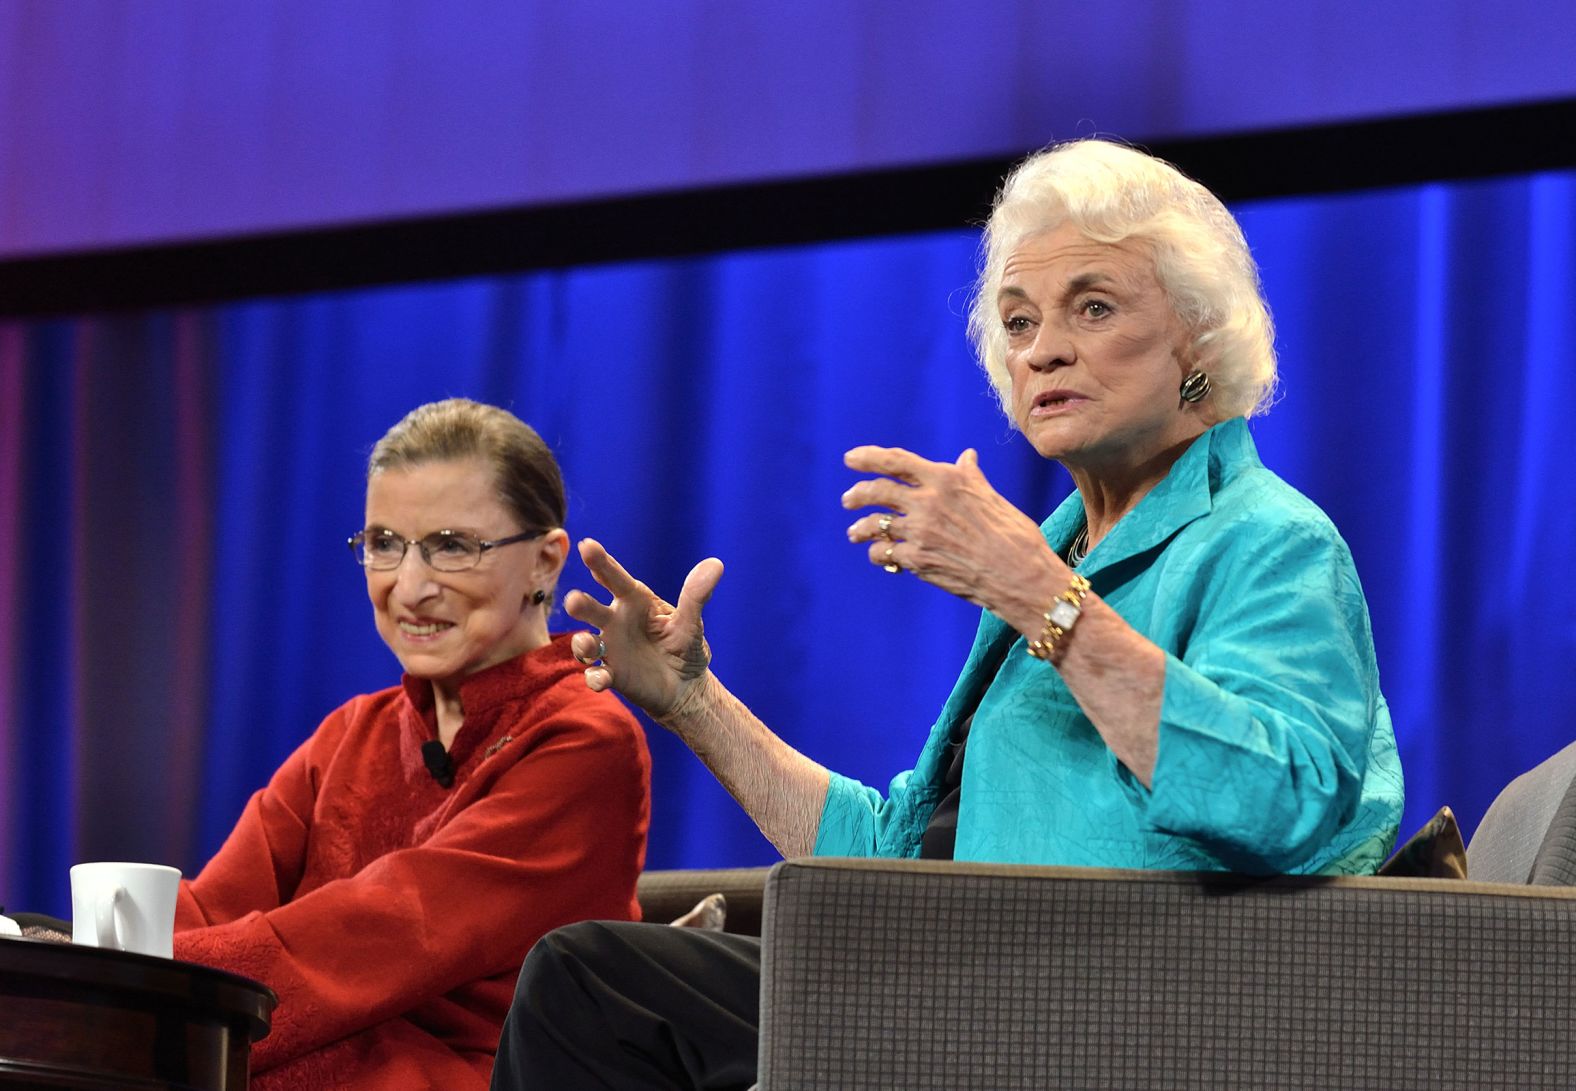 O'Connor and Supreme Court Justice Ruth Bader Ginsburg attend a Women's Conference in Long Beach, California, in 2010.